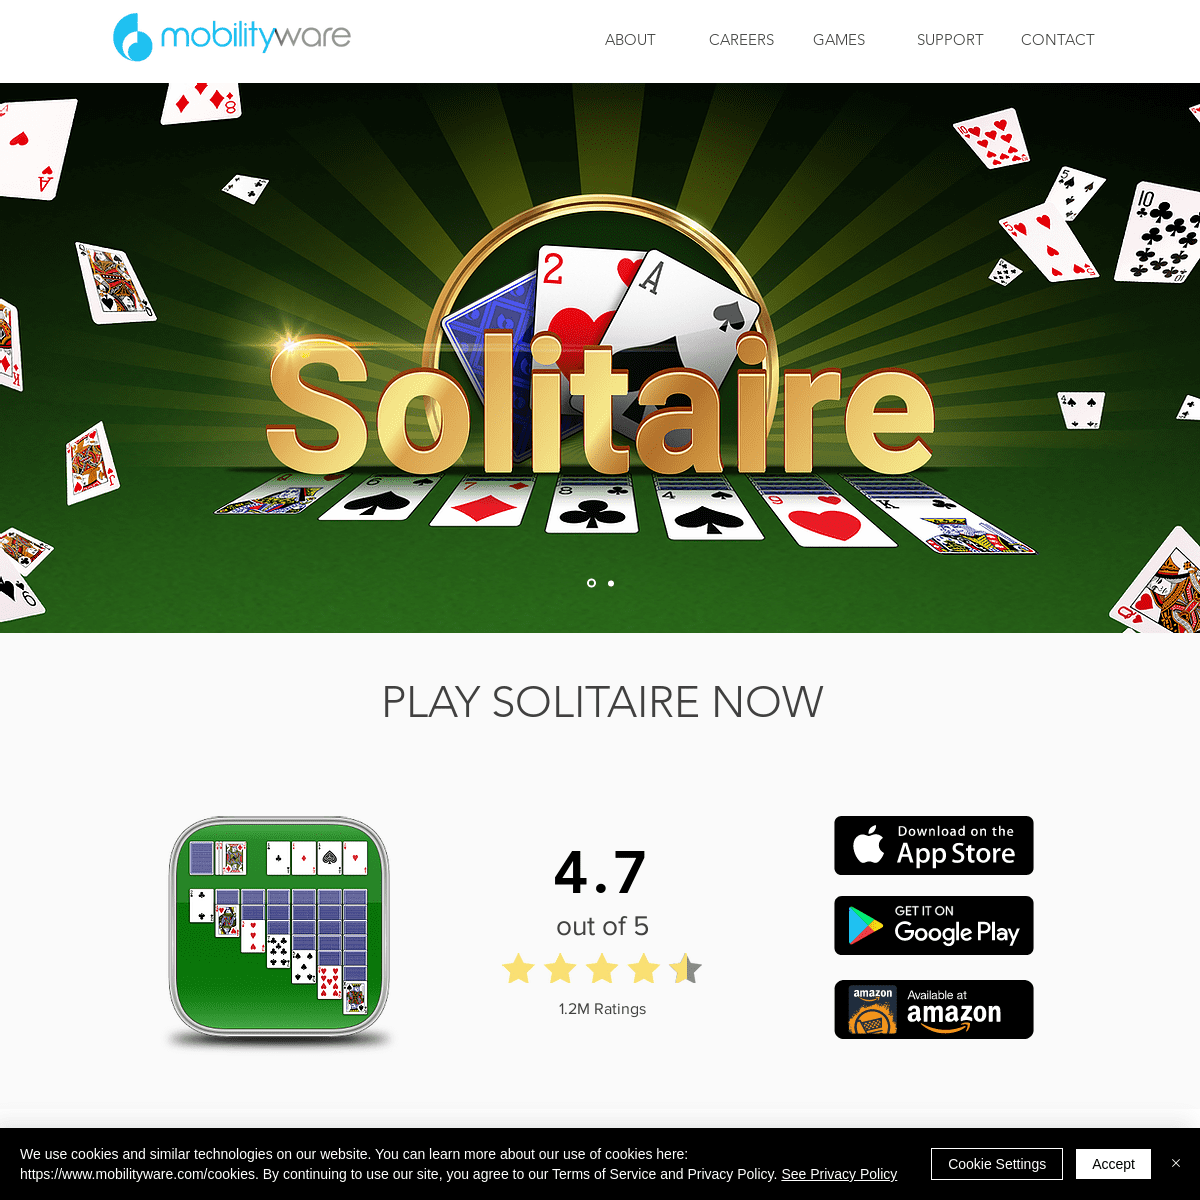 Solitaire - MobilityWare - Irvine